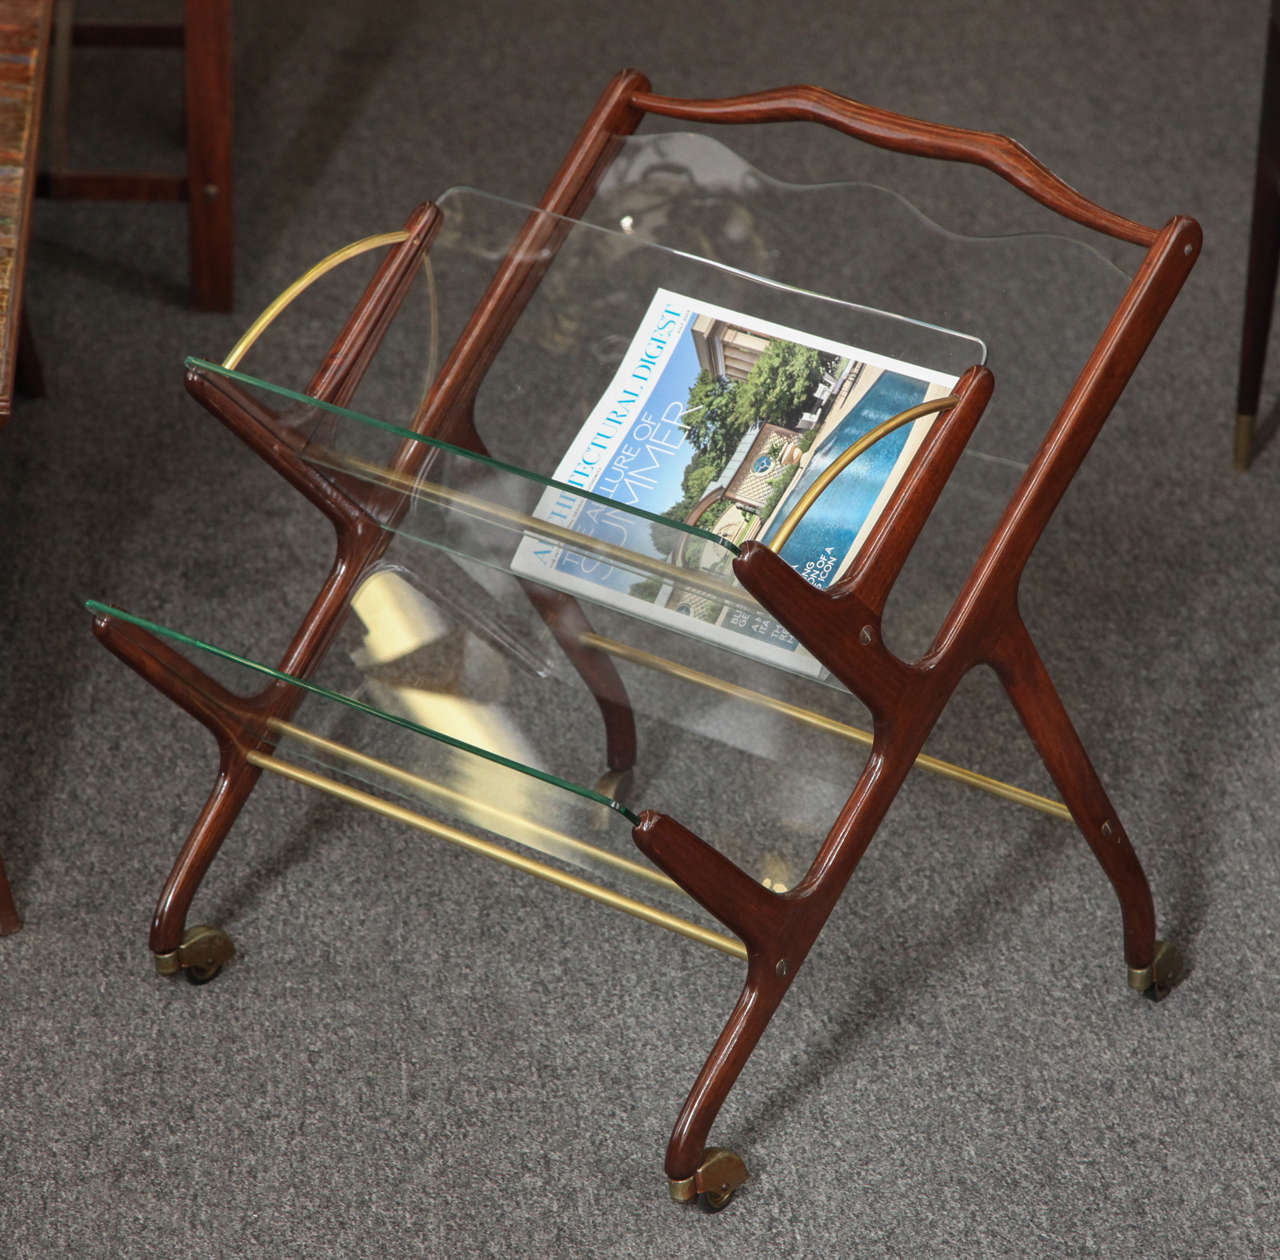 Beautiful magazine cart designed by Cesare Lacca made in Milan, 1955, one of his best models, great quality.
 